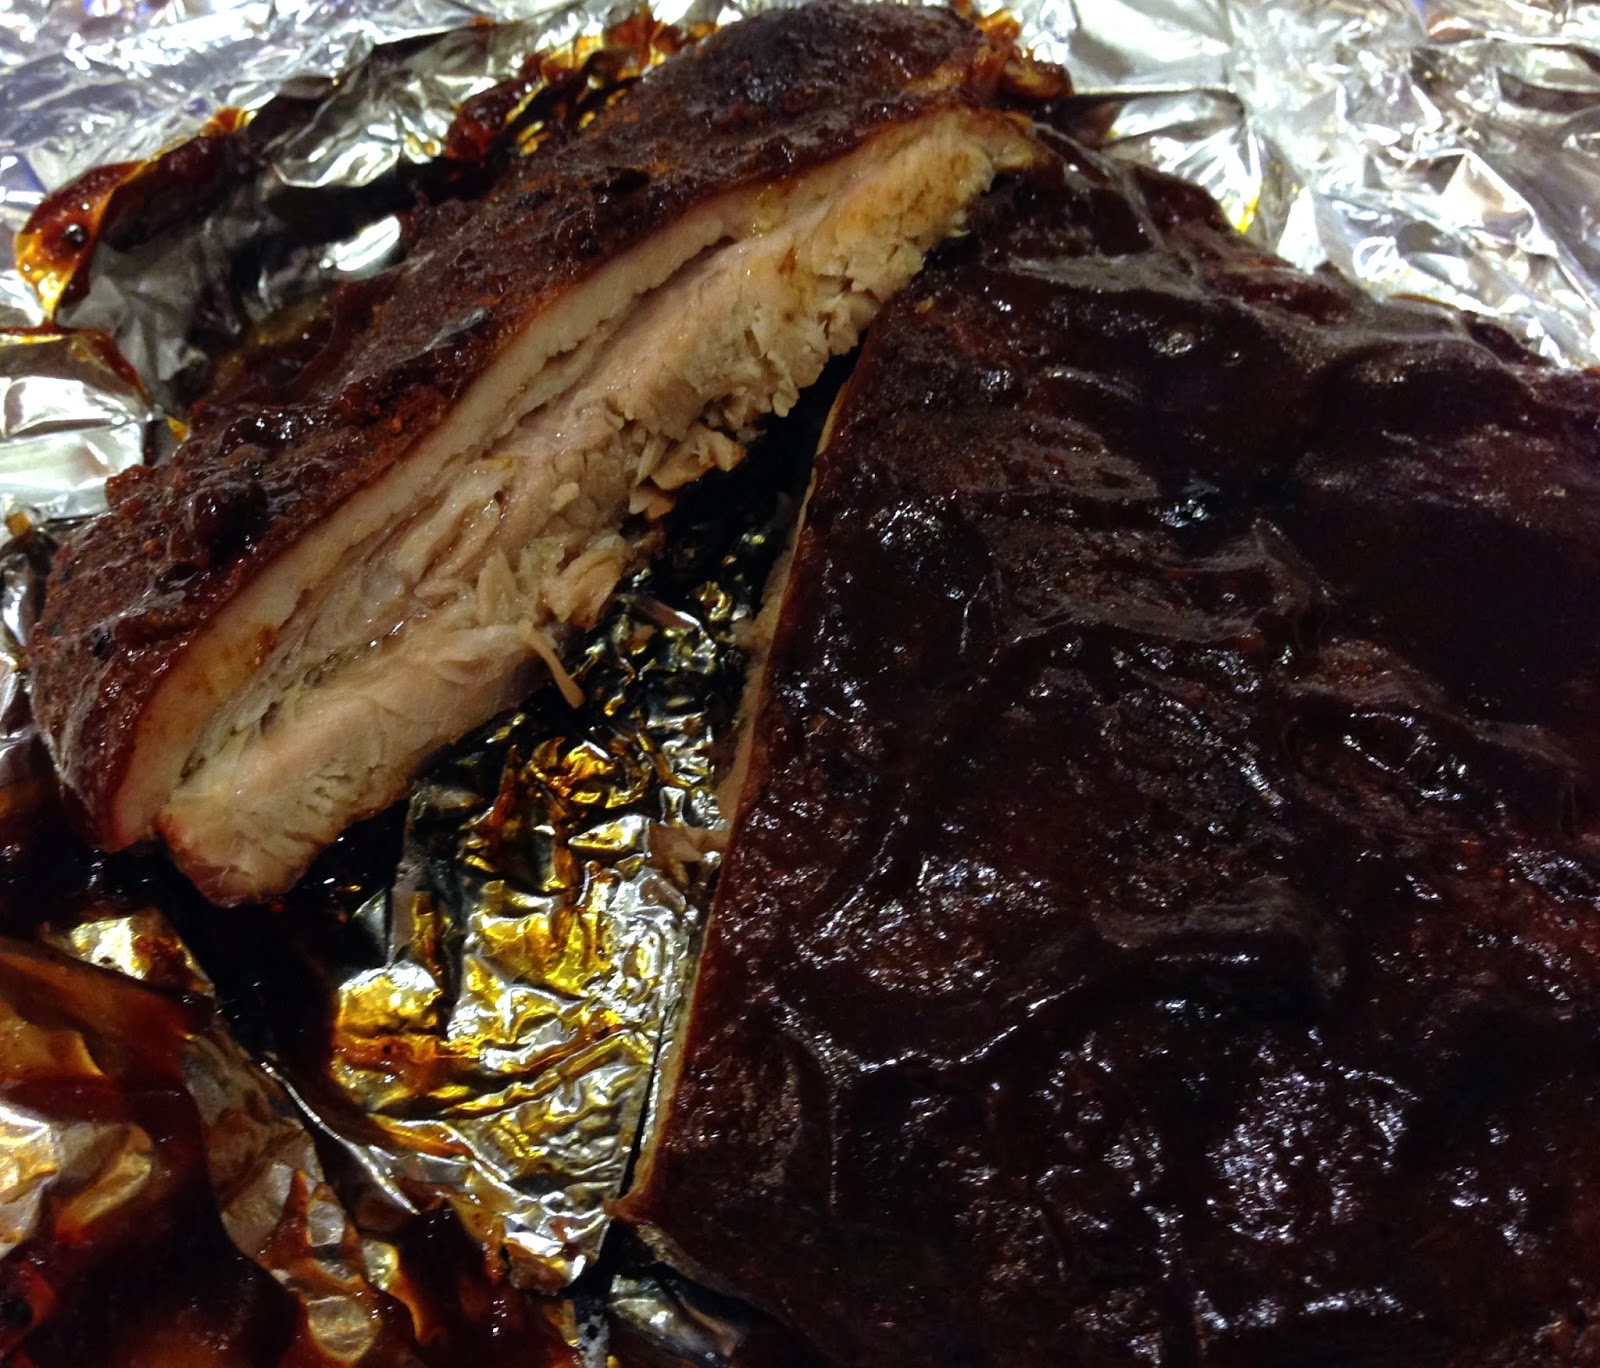 TASTE OF HAWAII: BBQ RIBS COOKED IN MASTERBUILT ELECTRIC SMOKER